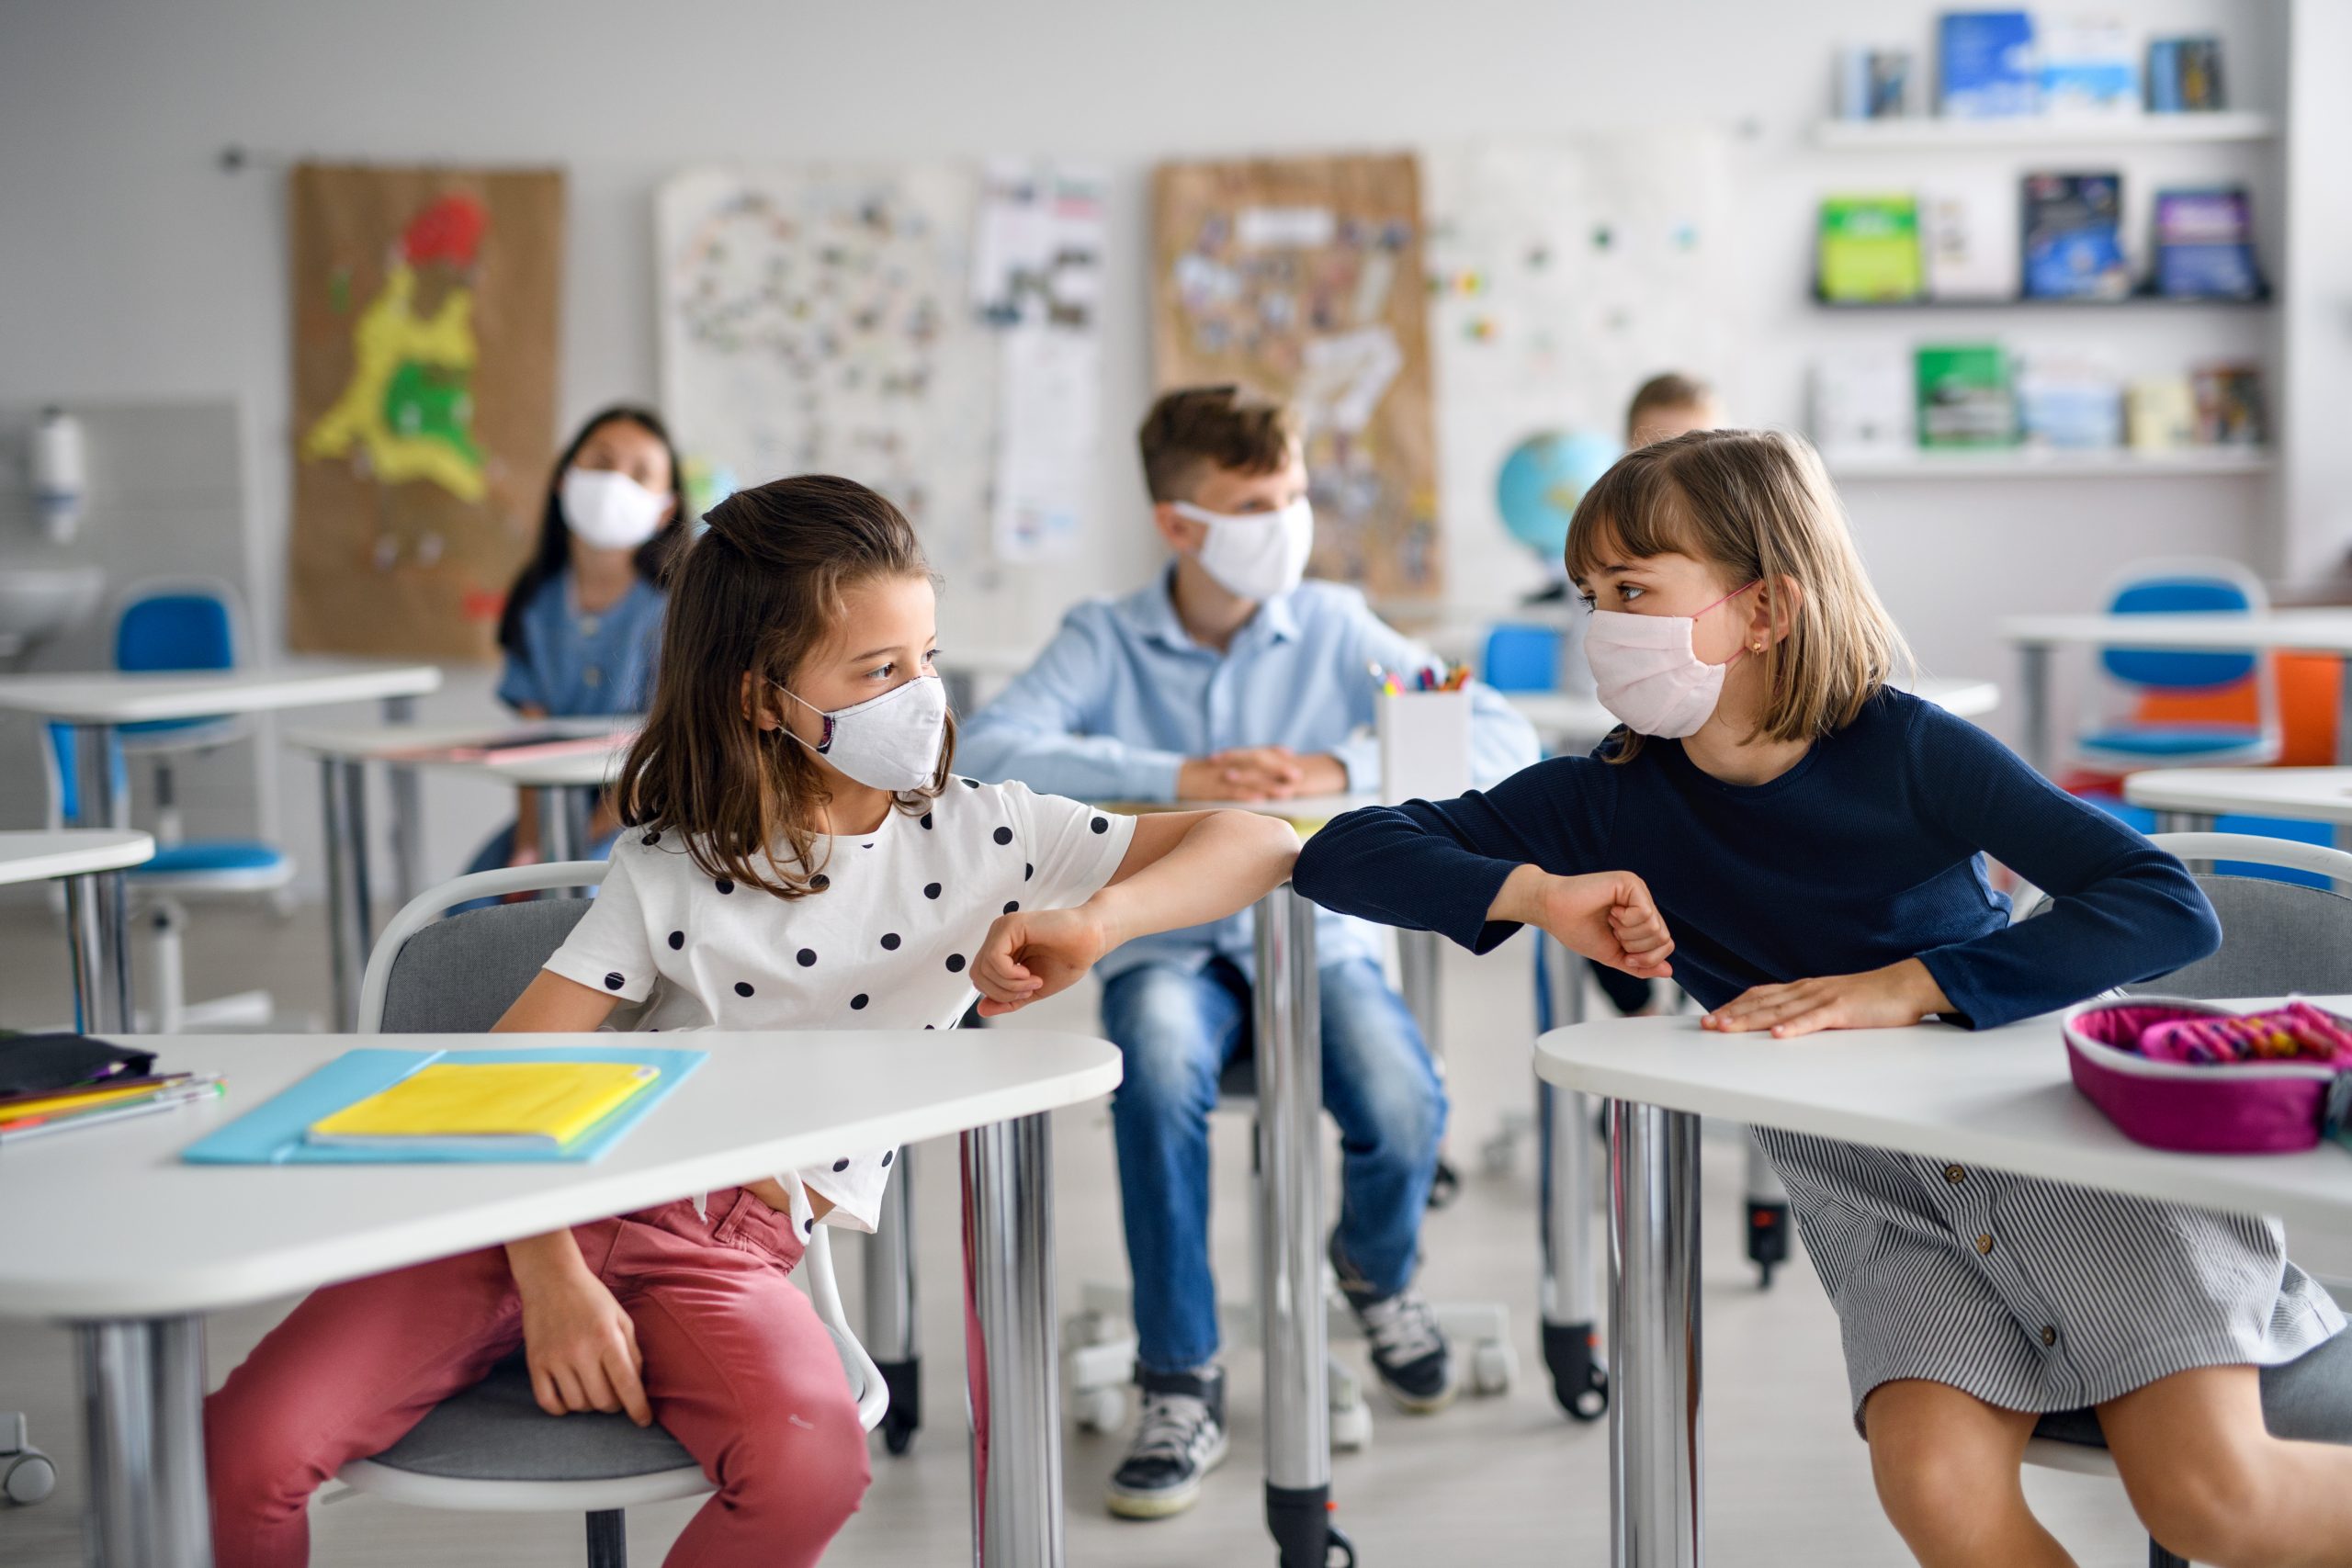 Kids back in school during COVID wearing masks